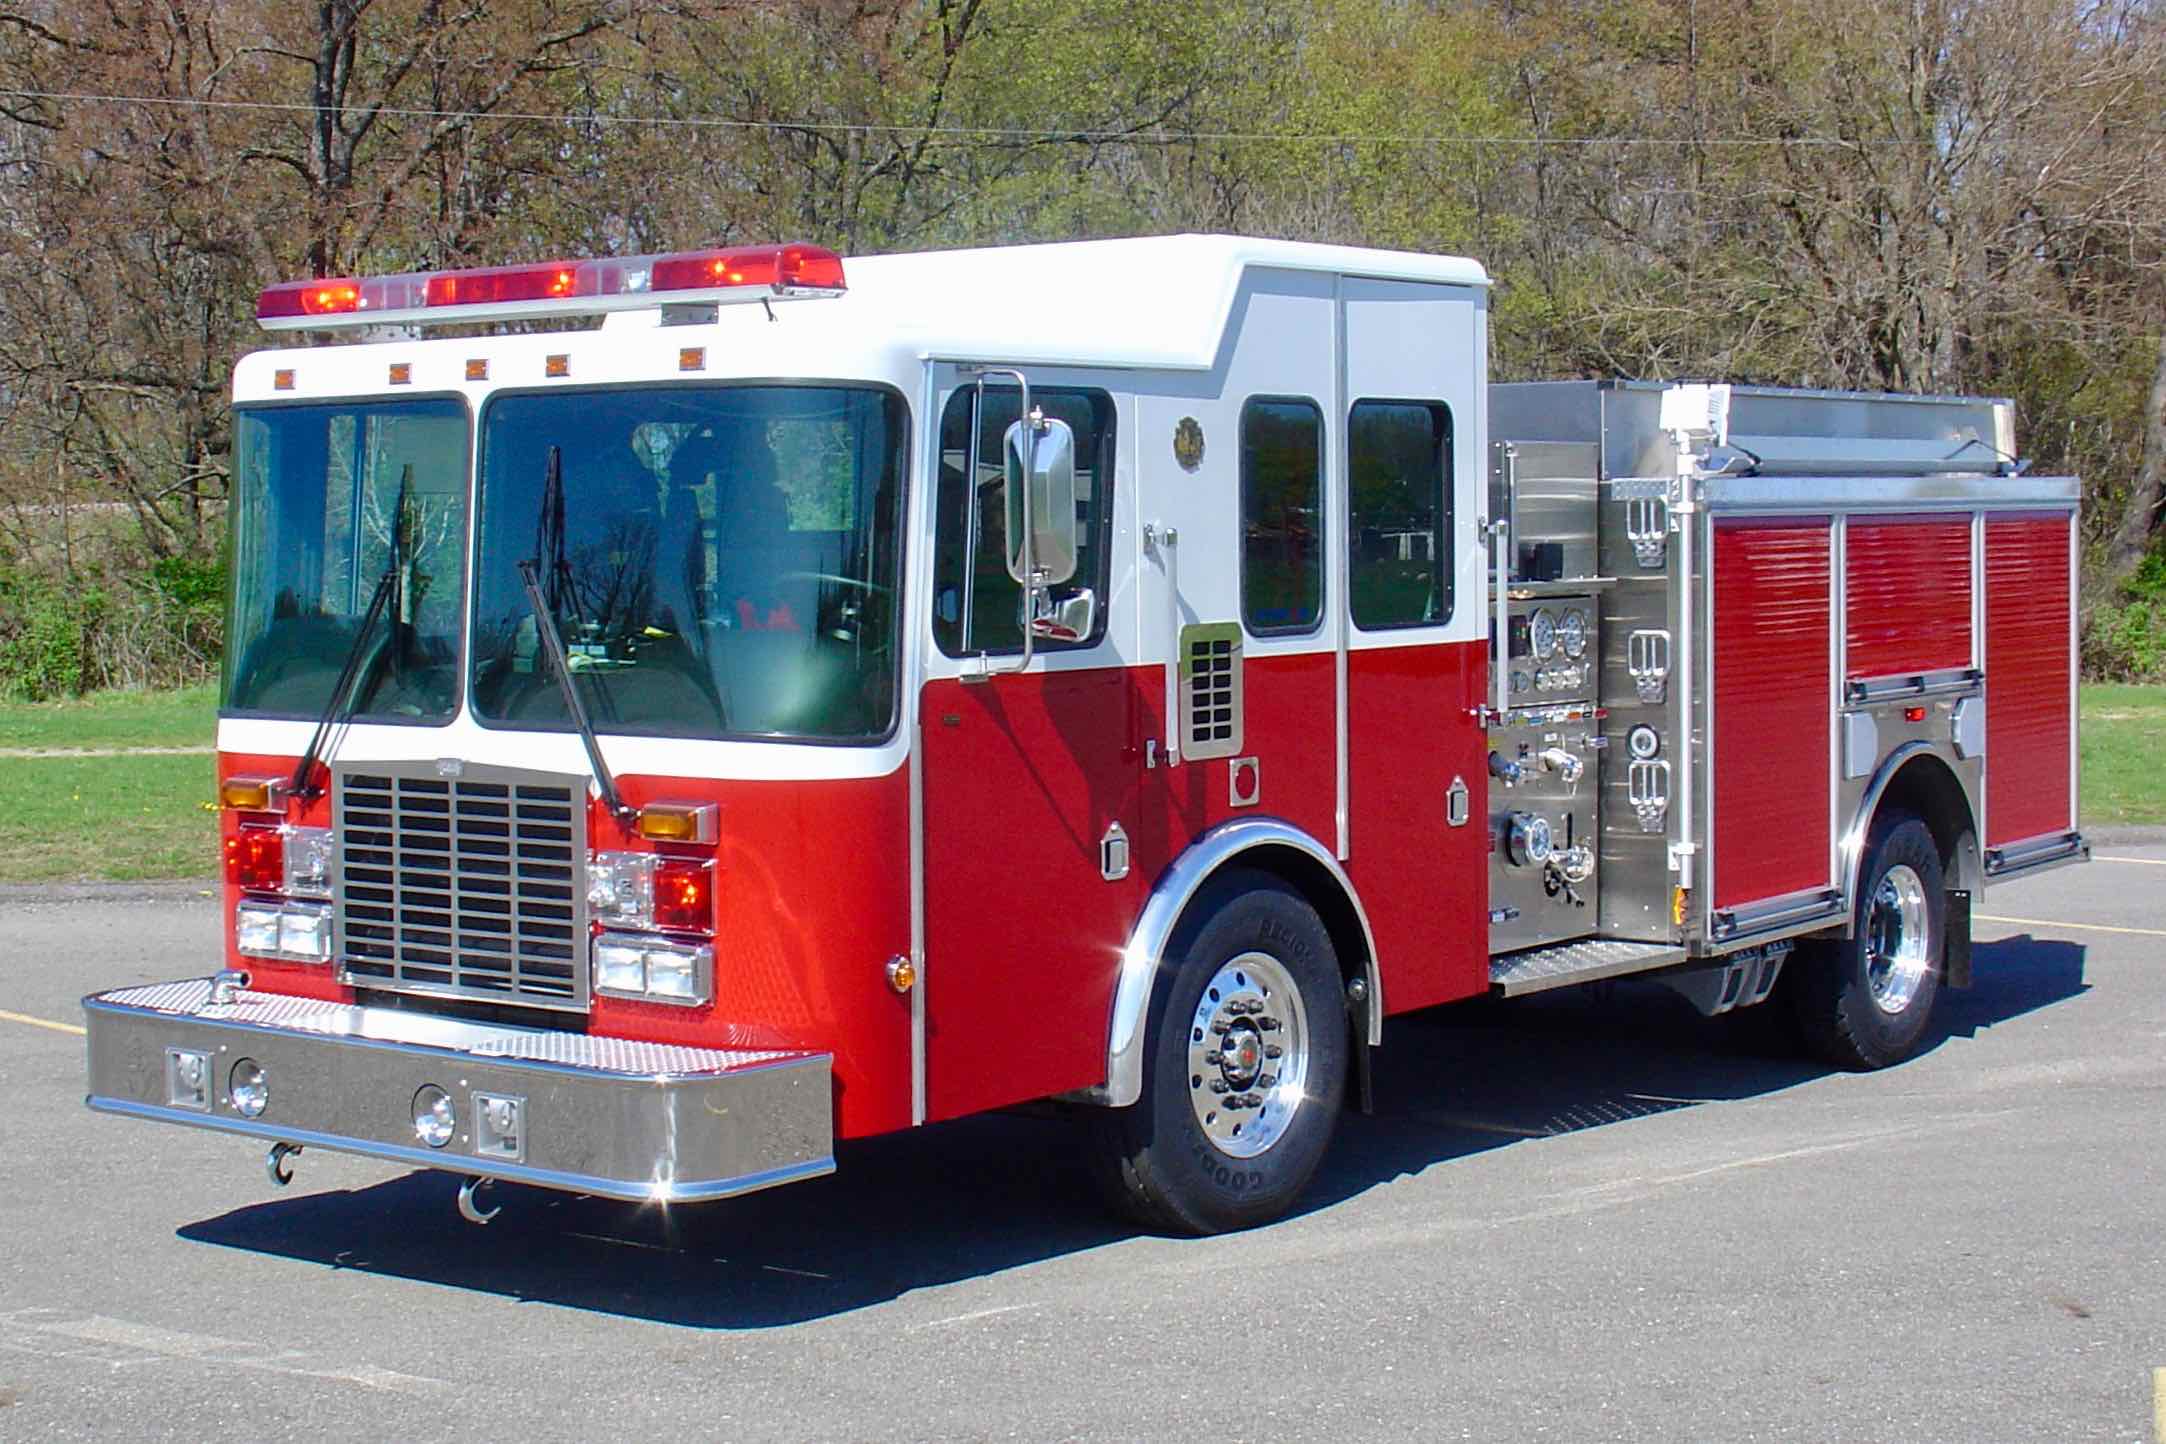 Stamford Fire and Rescue (20518 – 20519), CT – #20518